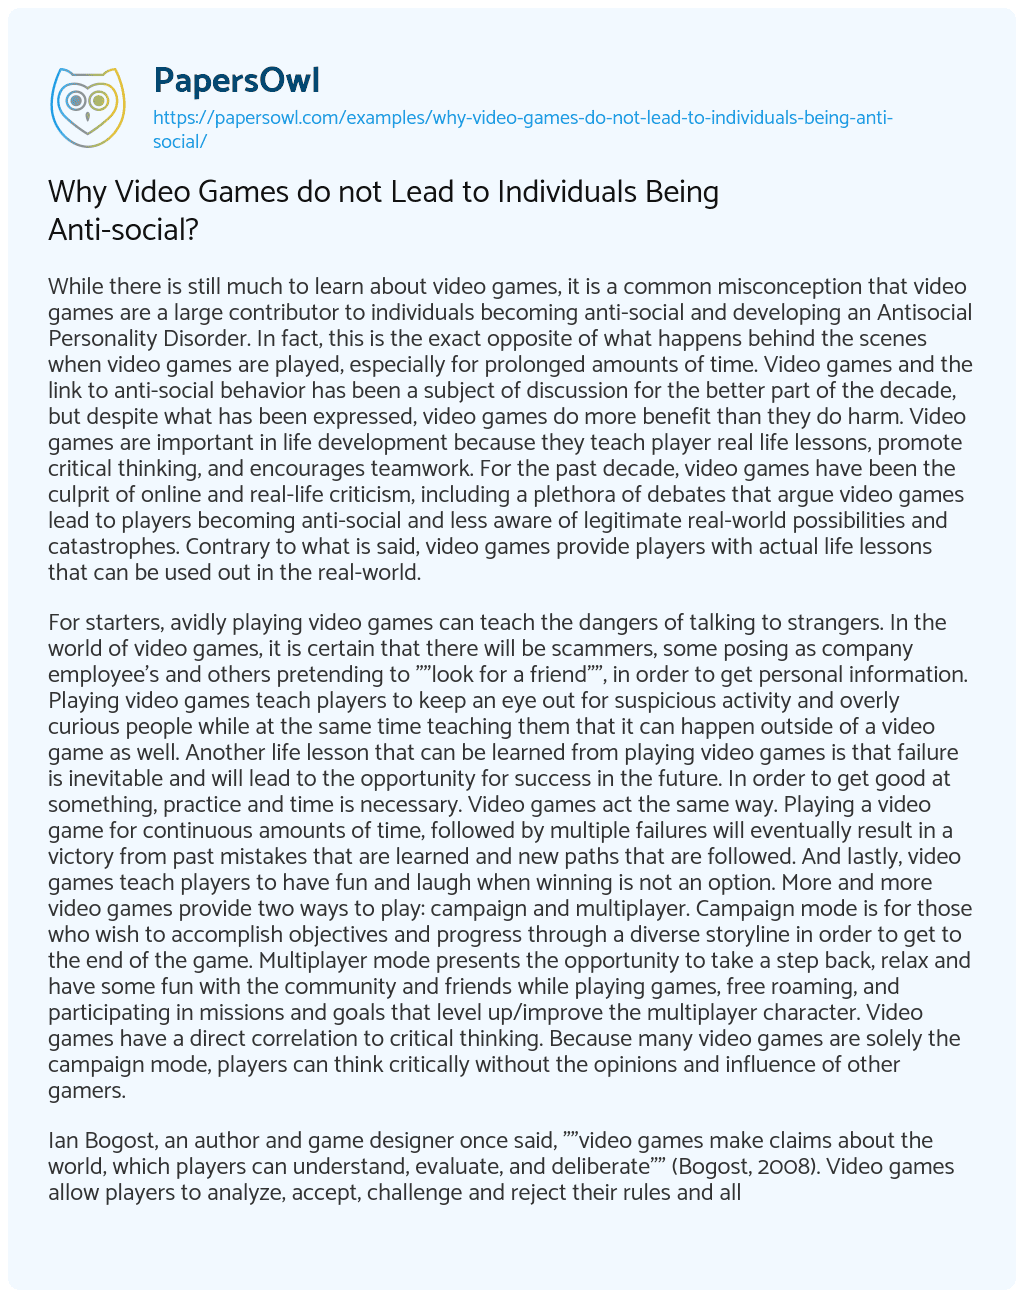 Essay on Why Video Games do not Lead to Individuals being Anti-social?